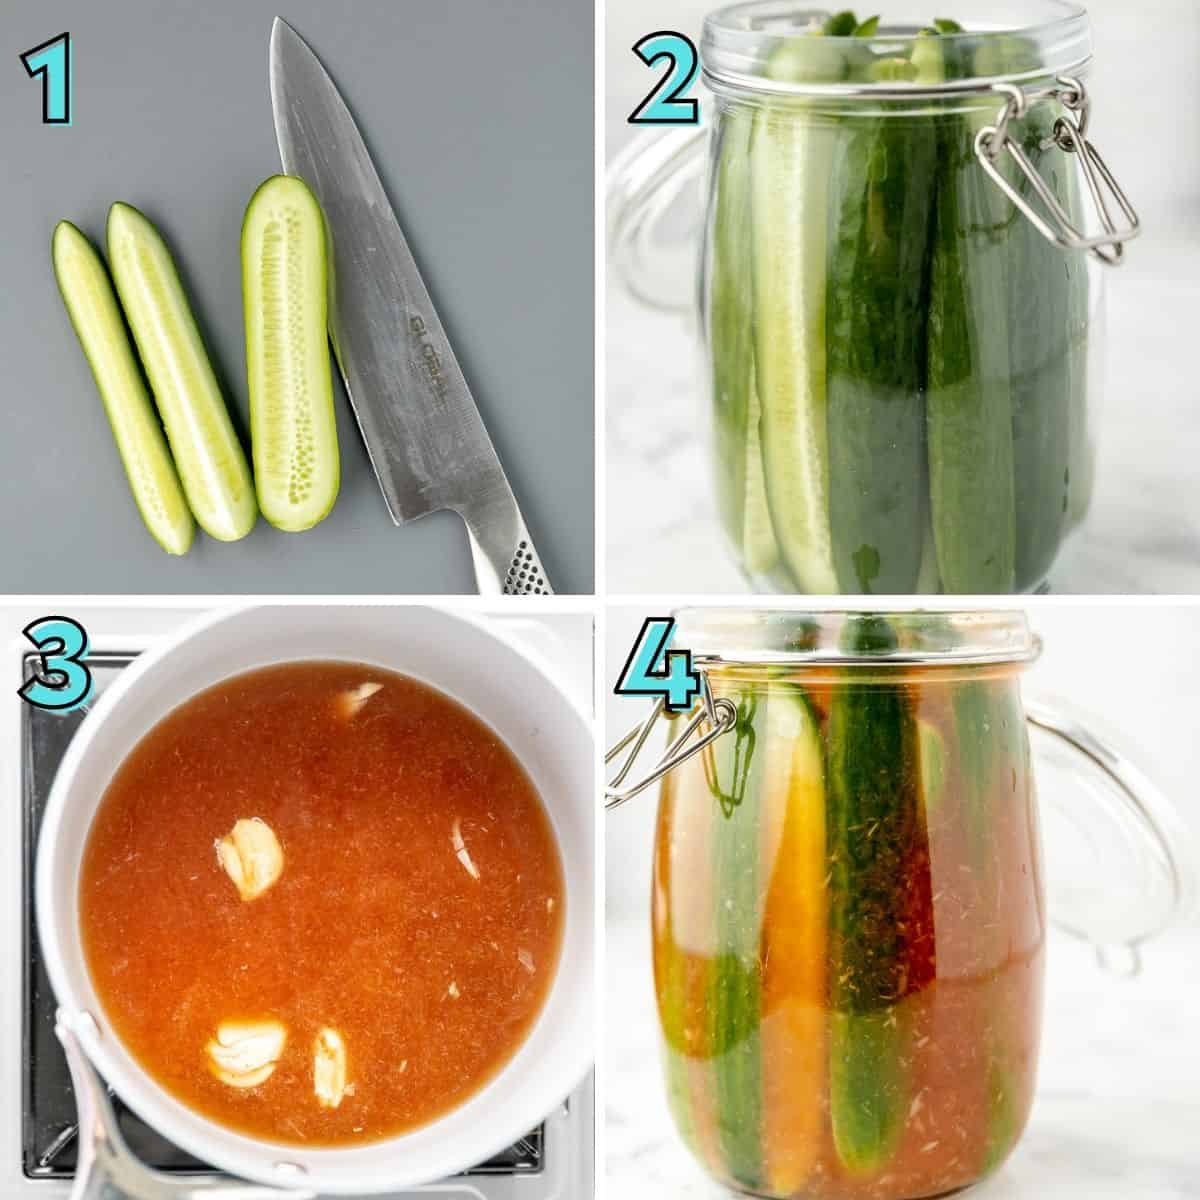 Step by step instructions to prepare pickles, in a collage.